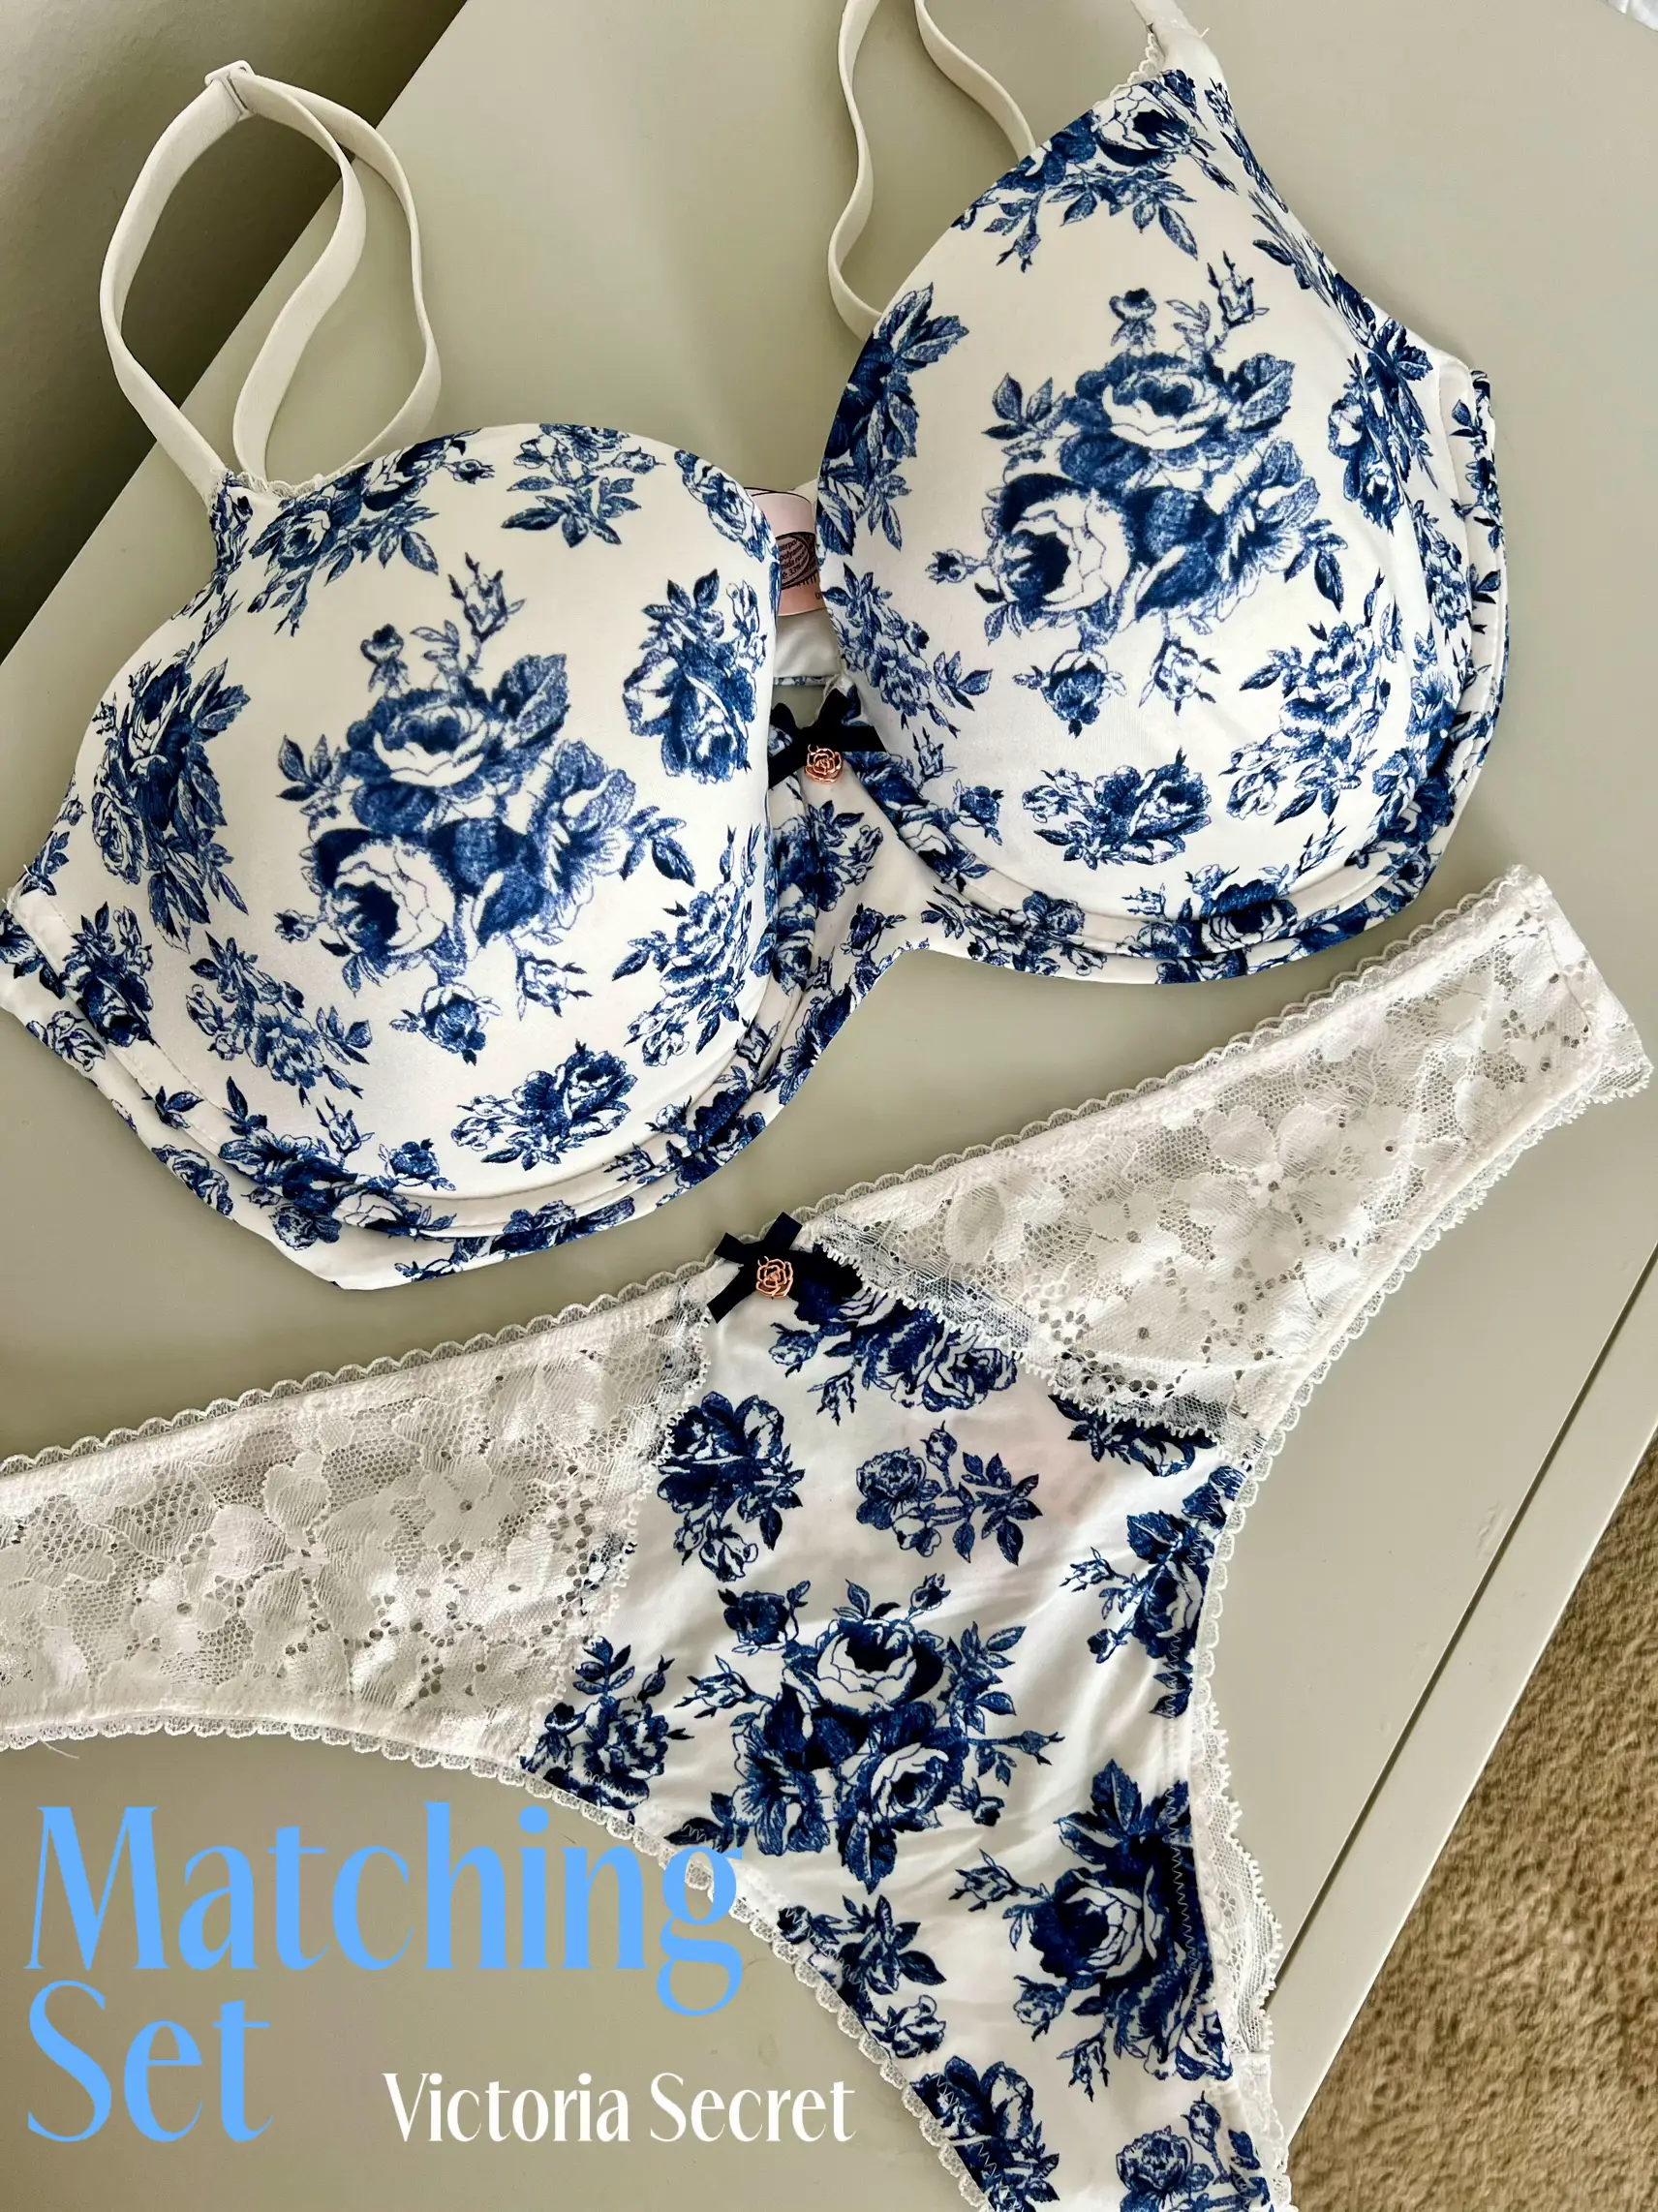 Matching lingerie set, Gallery posted by Kaitlyn 🤍